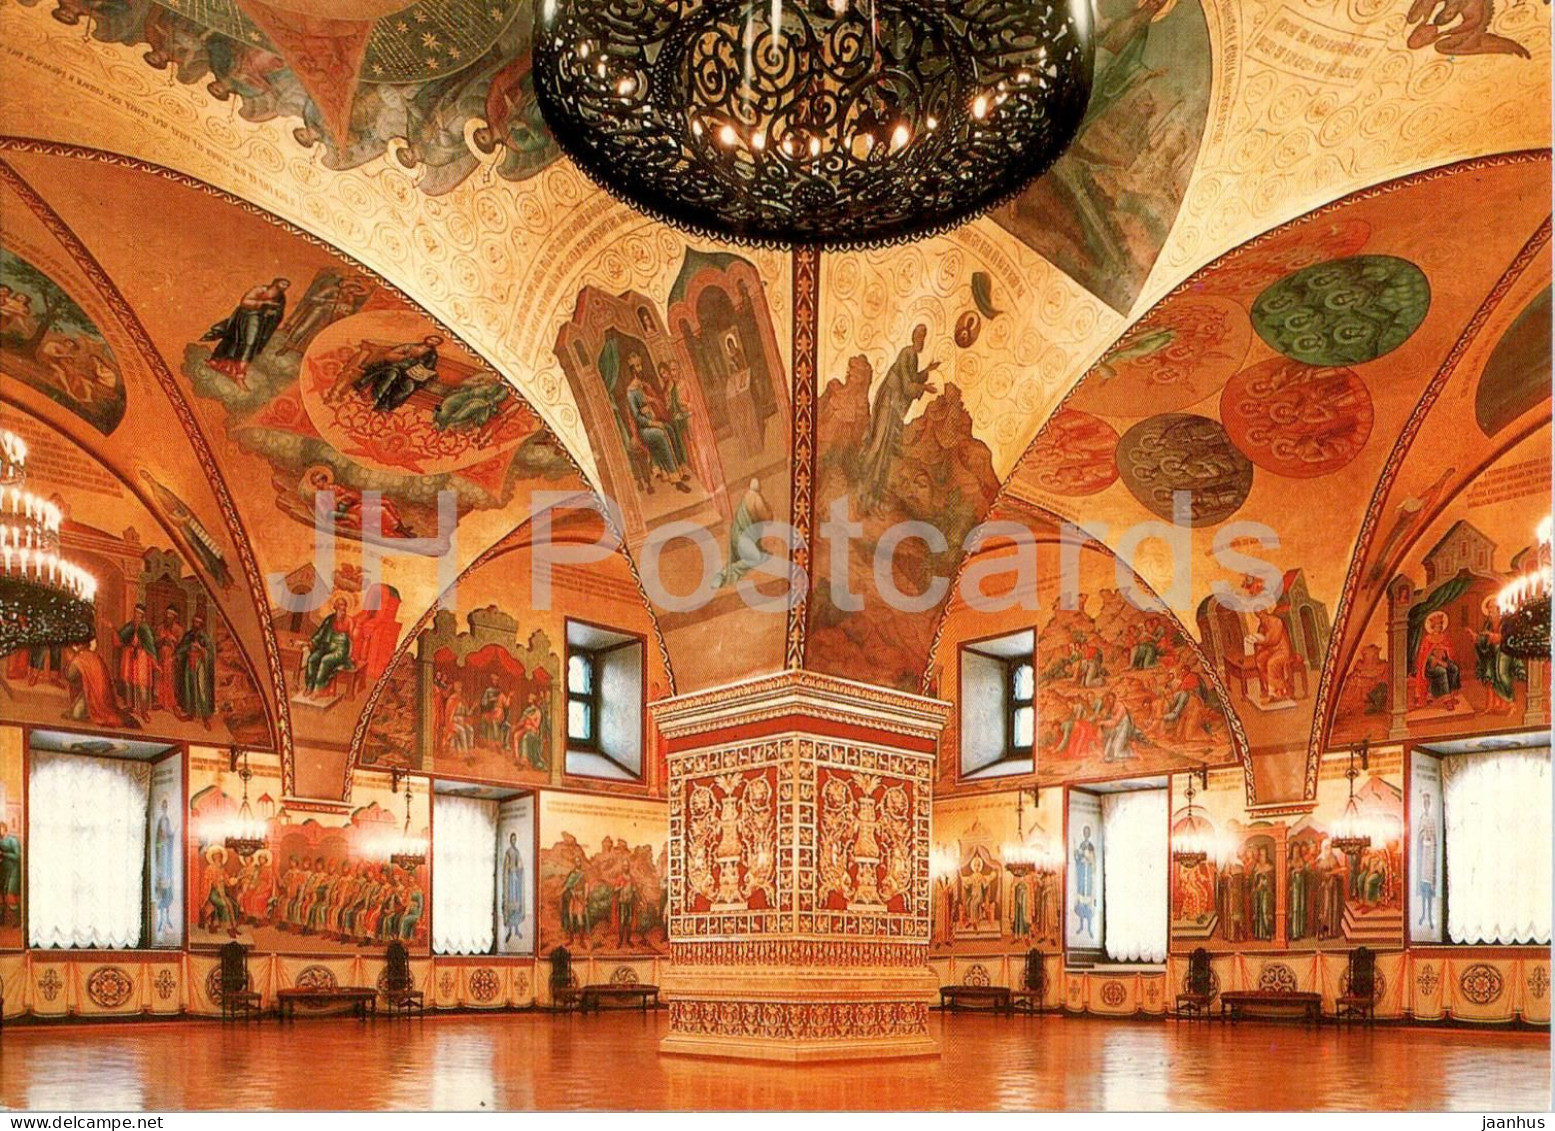 Moscow Kremlin - Faceted Chamber - South Eastern Portion Of The Interior - 1985 - Russia USSR - Unused - Russland